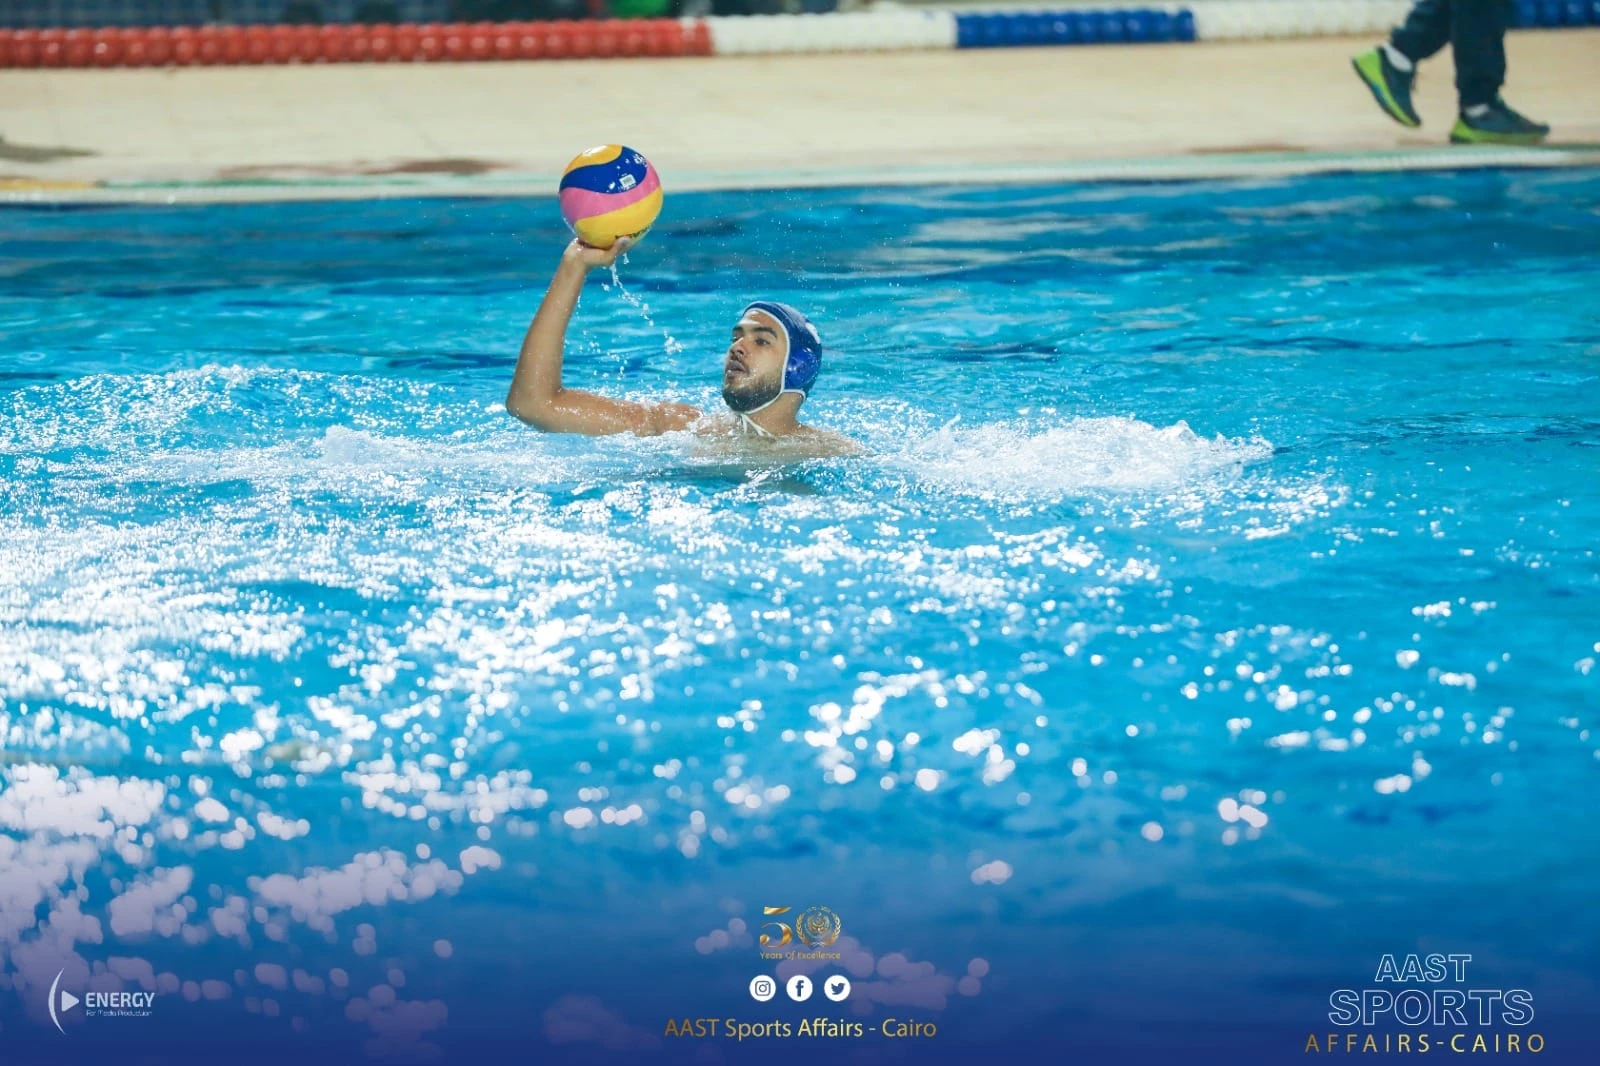 The Academy's water polo team in Cairo wins silver in the championship of private universities held at the American University in Cairo.8